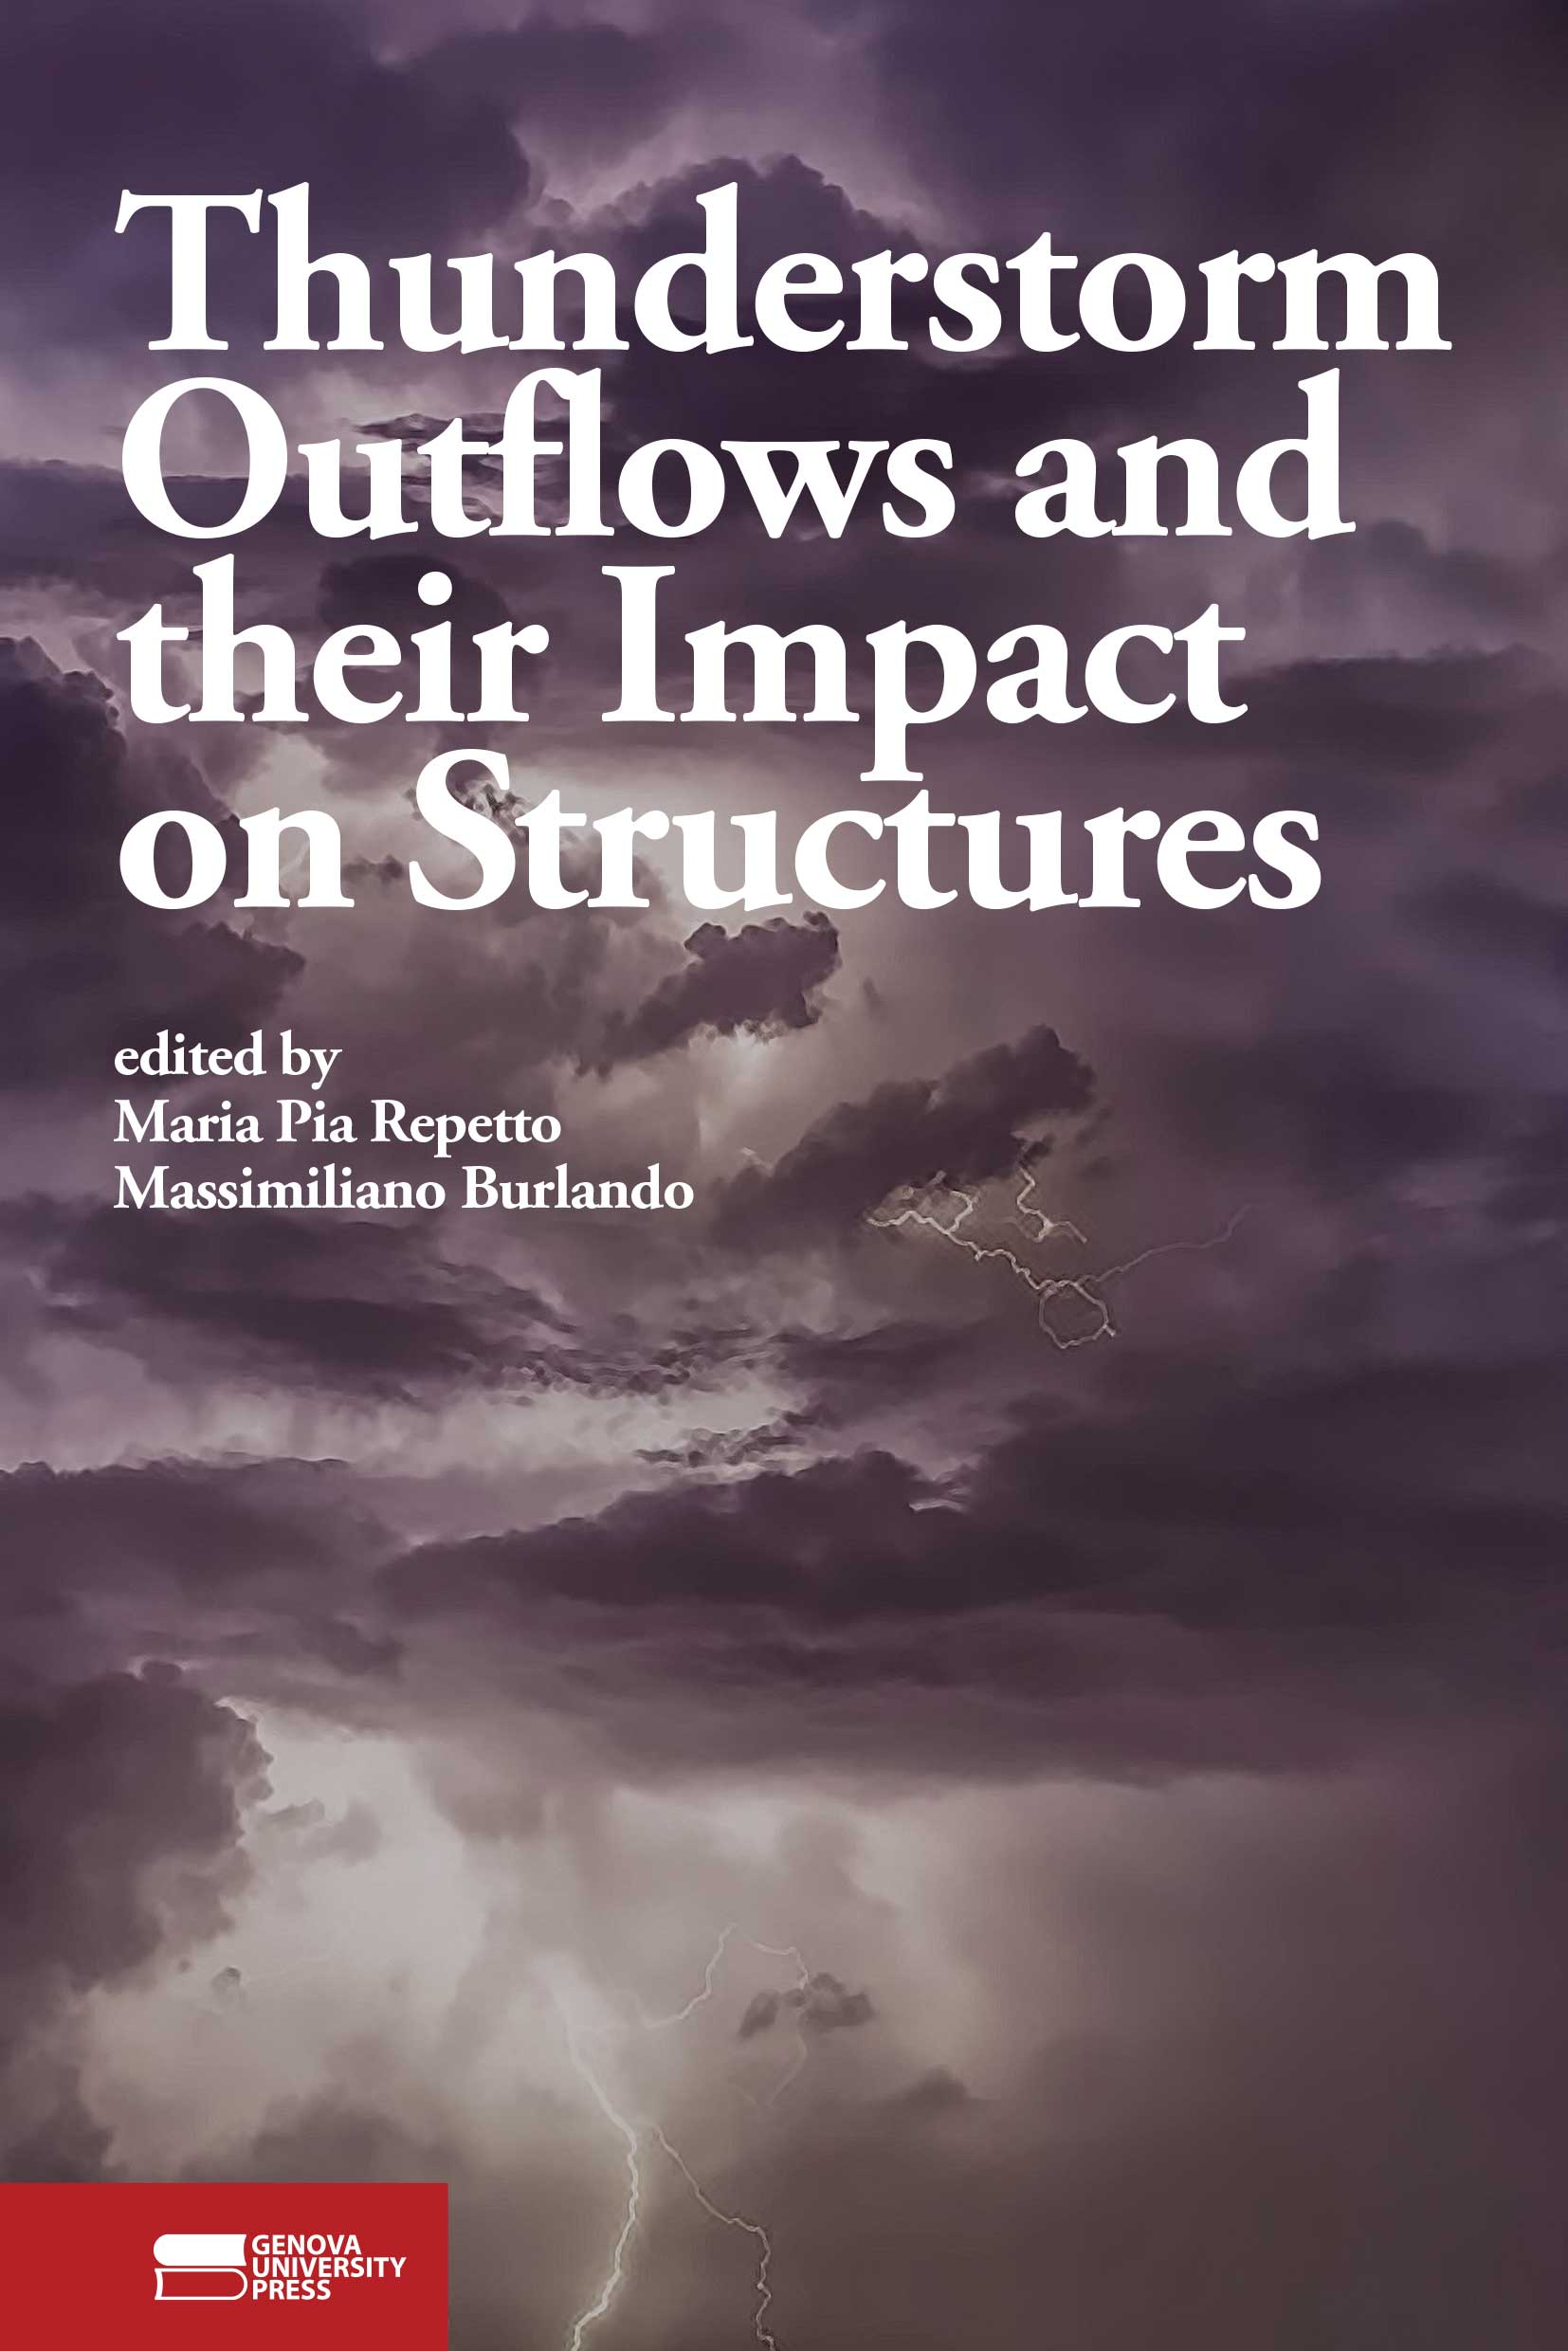 Thunderstorm Outflows and their Impact on Structures